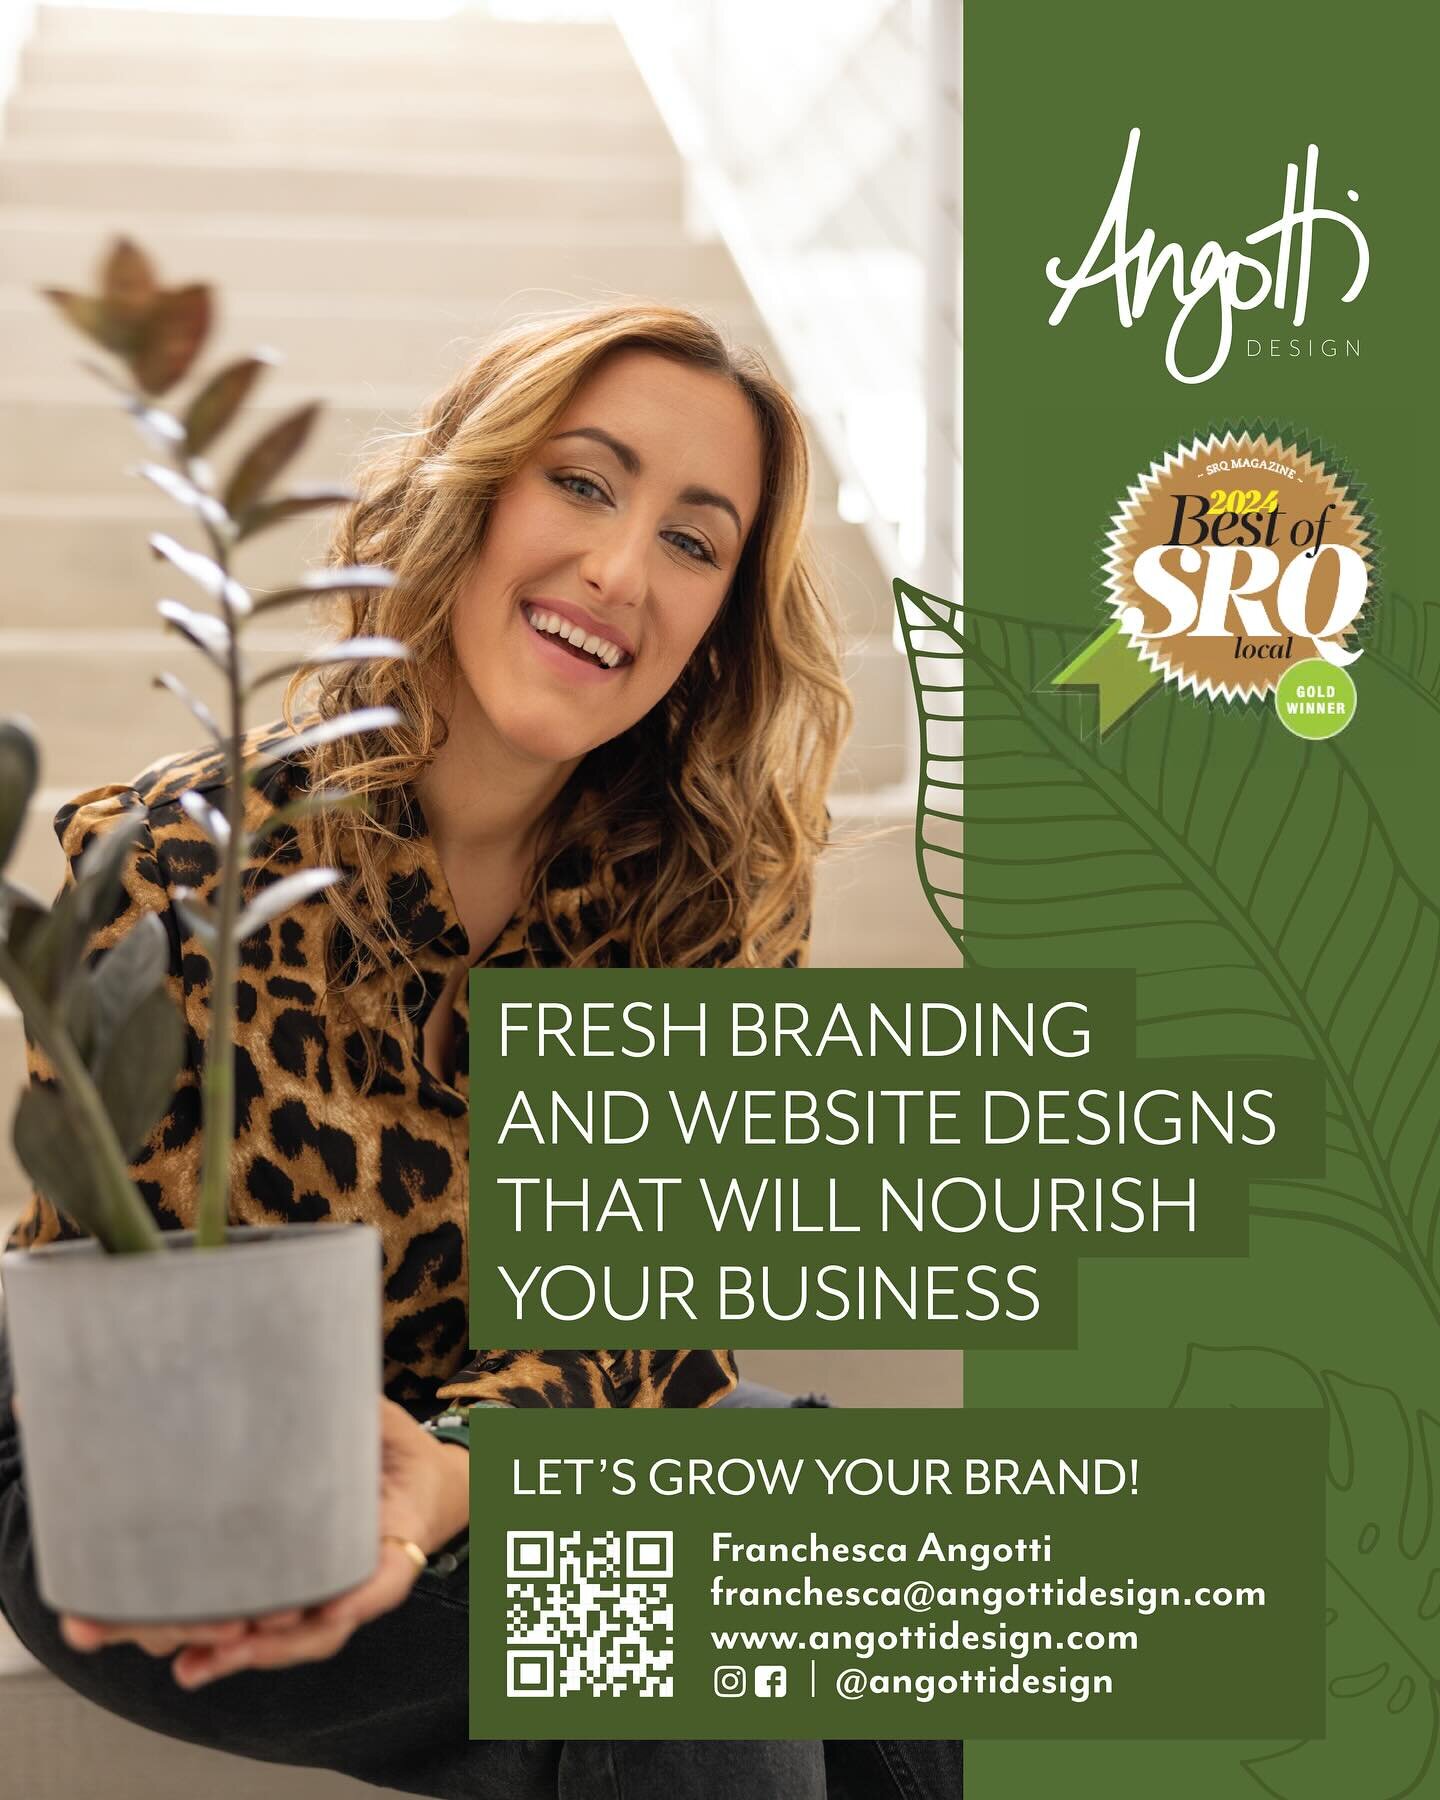 Best of SRQ: Gold 🤩✨

Thank you @srqmag for rounding up all the incredible talent in the SRQ area! 

#angottidesign #bestofsrq #sarasotaflorida #graphicdesign  #marketing